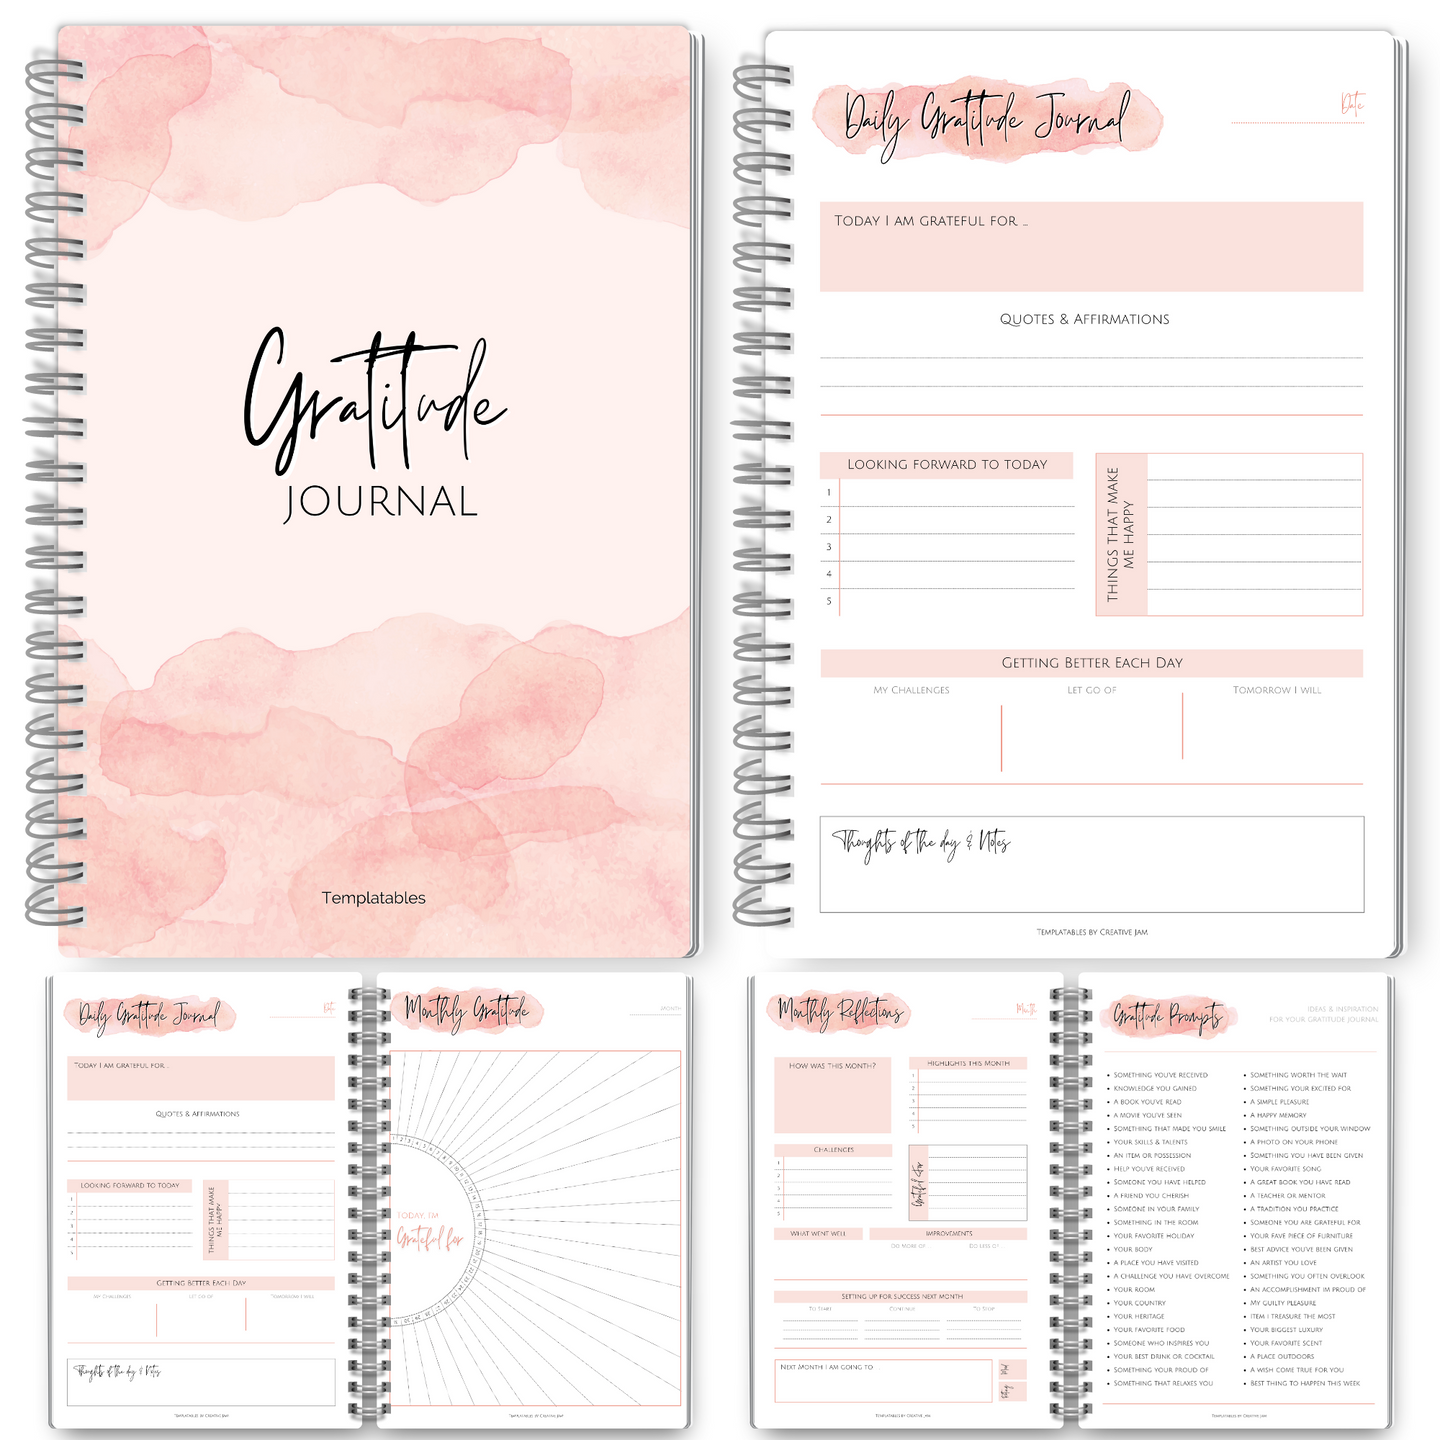 Gratitude & Mindfulness Journal | Gratitude Template, Self Care Planner, Positivity Diary, Daily Journal, Gratitude Jar, Wellness, Manifestation Journal | A5 Pink Watercolor